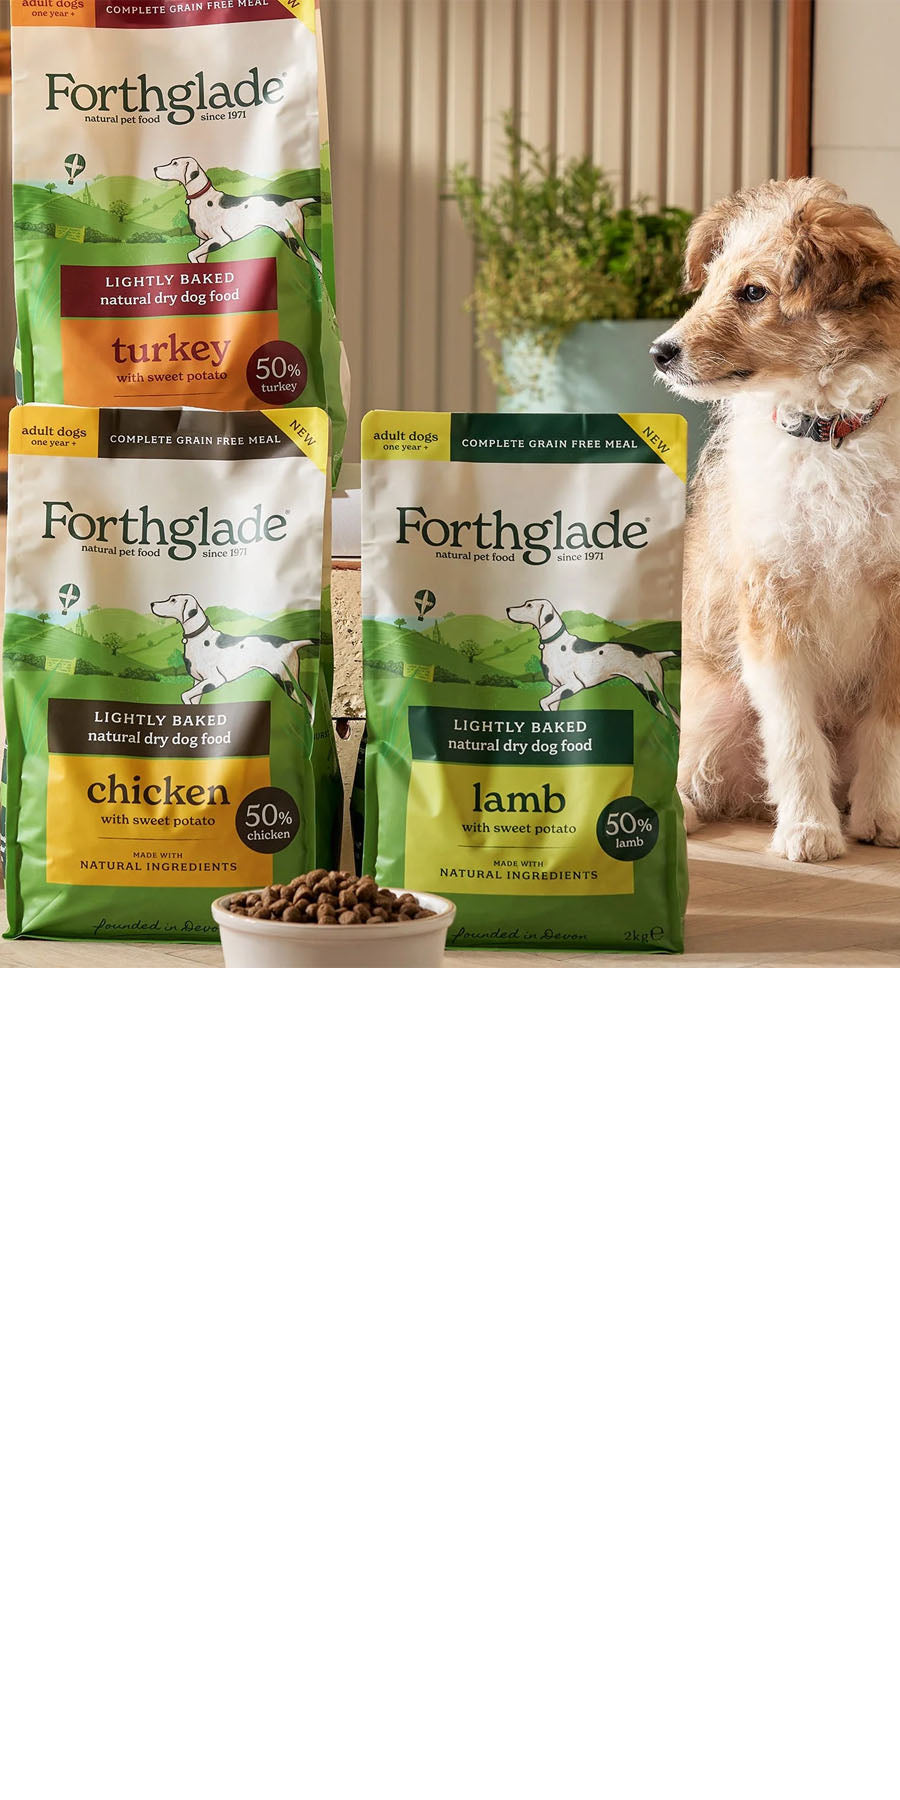 Forthglade dry dog food range picture, with a dog looking at the bags.